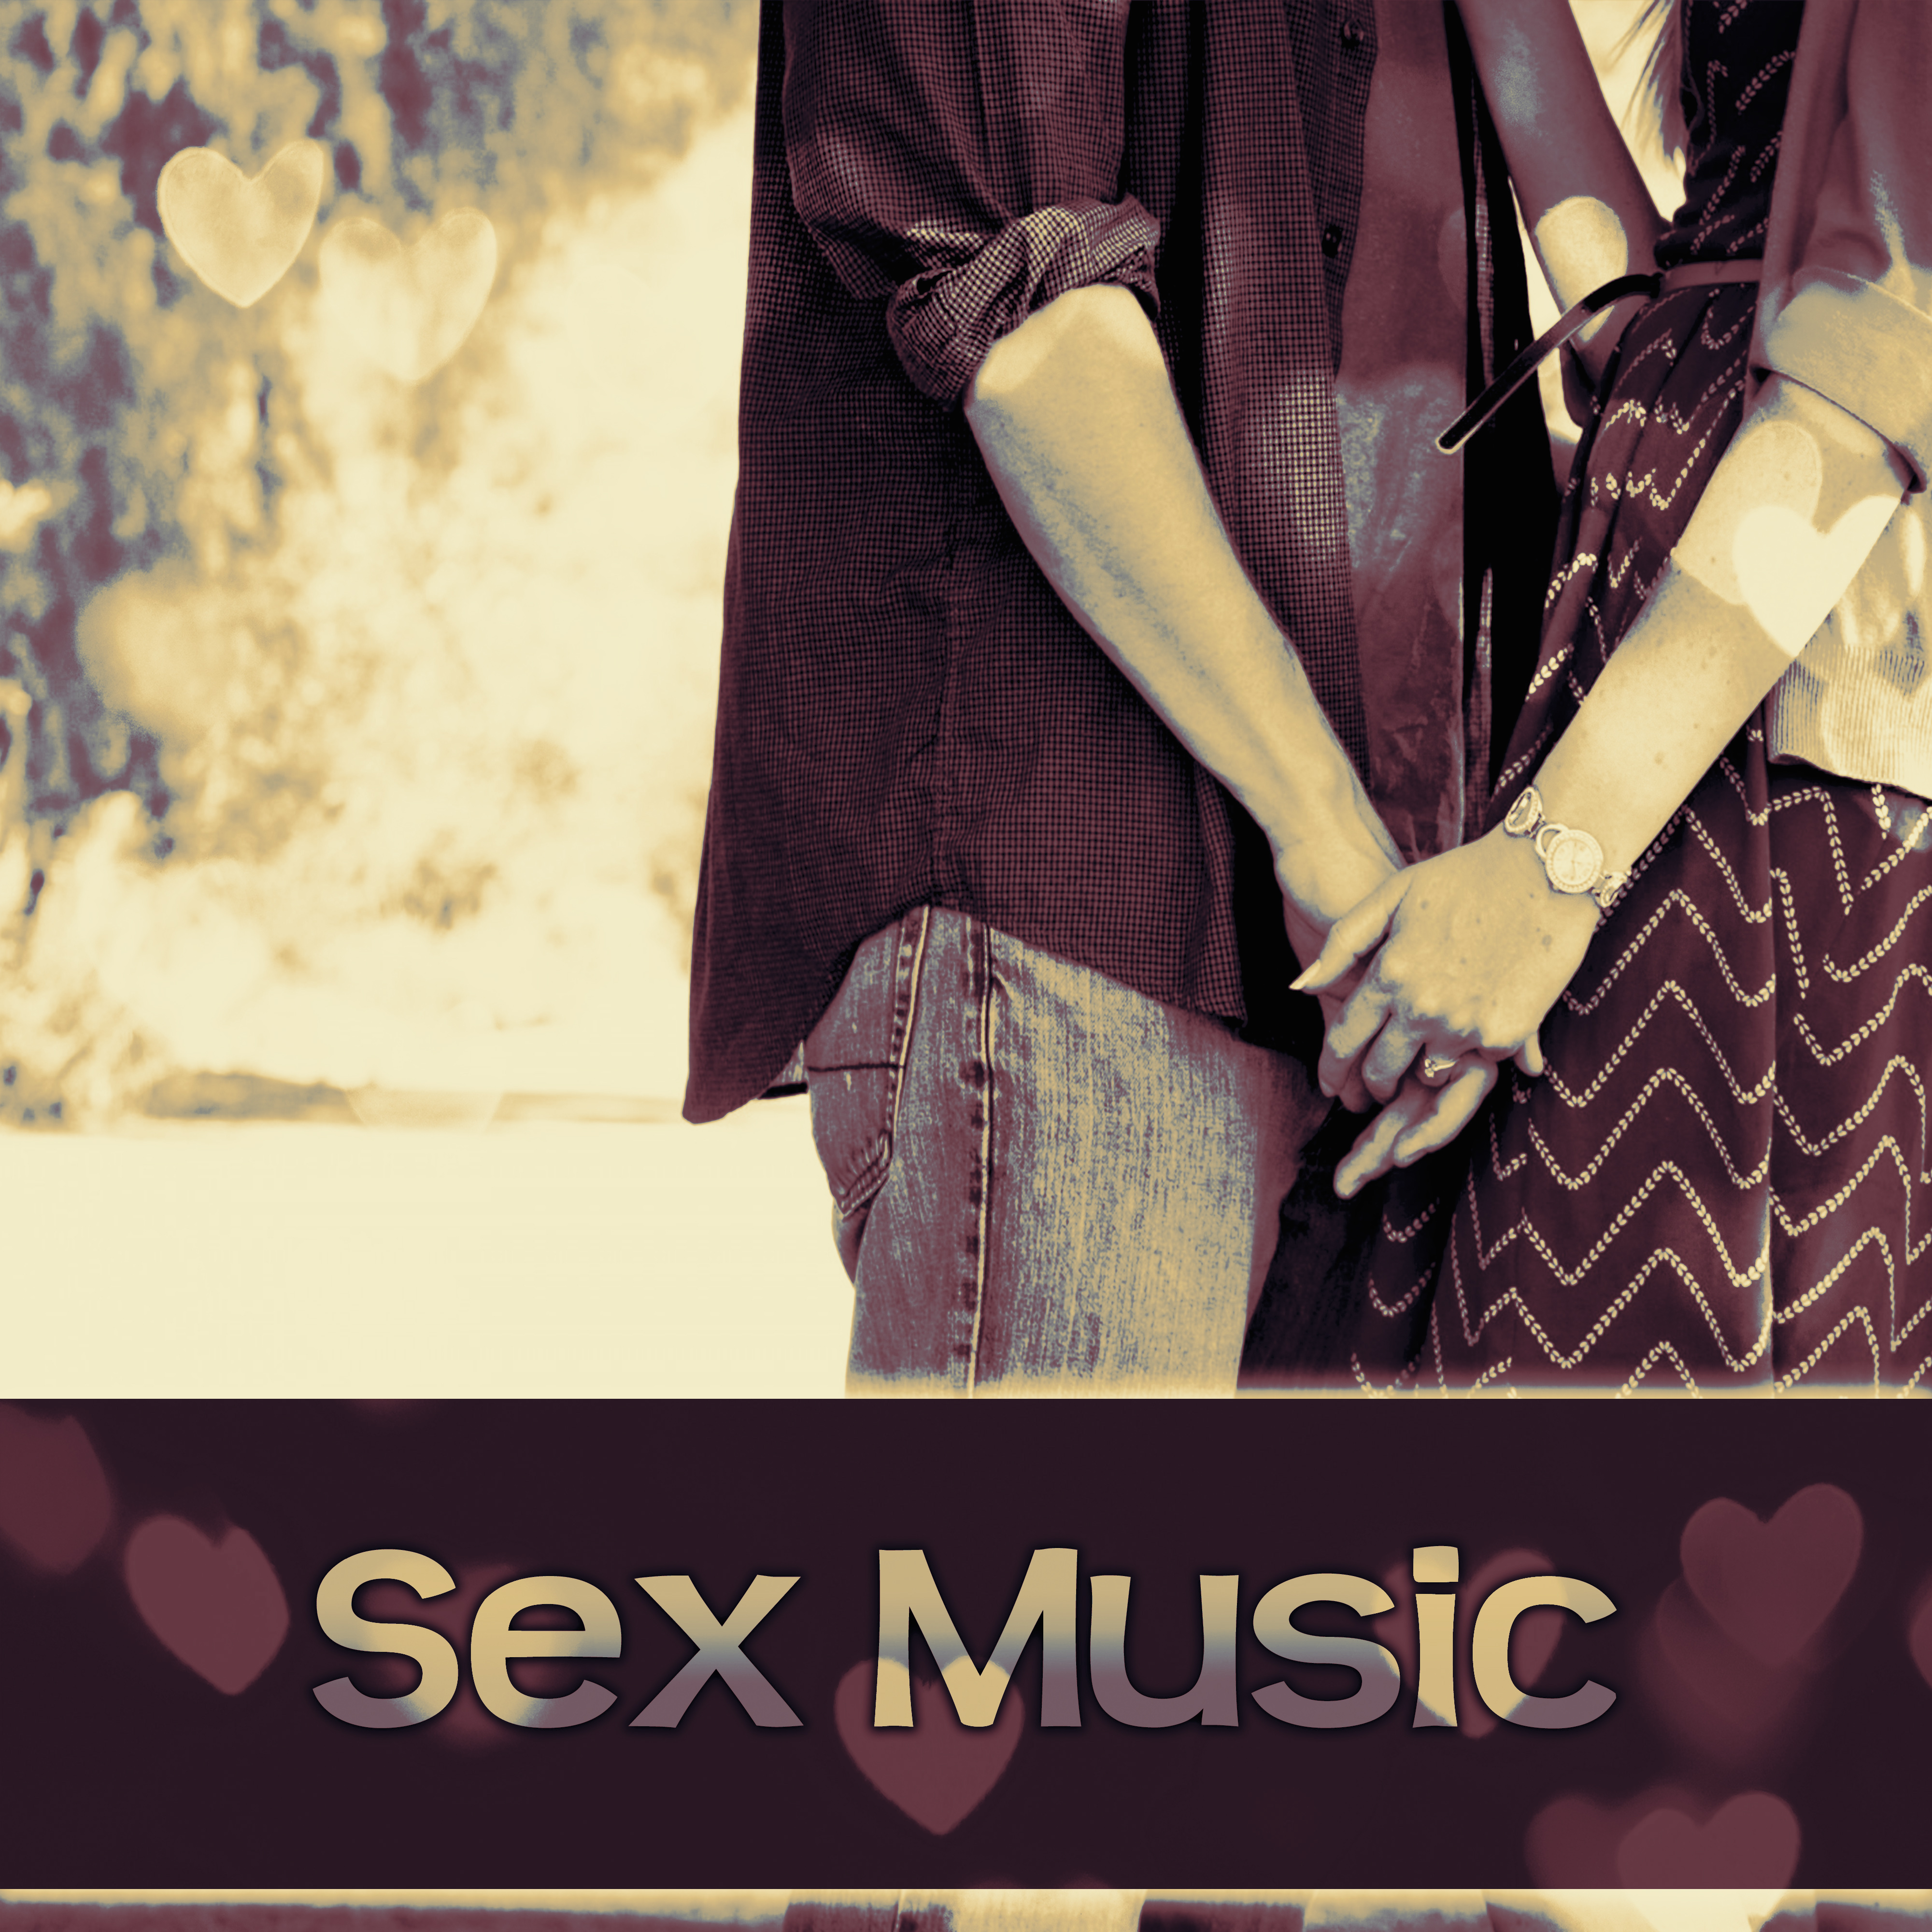 *** Music - The Best **** Chill Out Music for Making Love, **** Lounge, Summer Chill, Beach Party, Summer Lovers, Beach Music, Summer Solstice